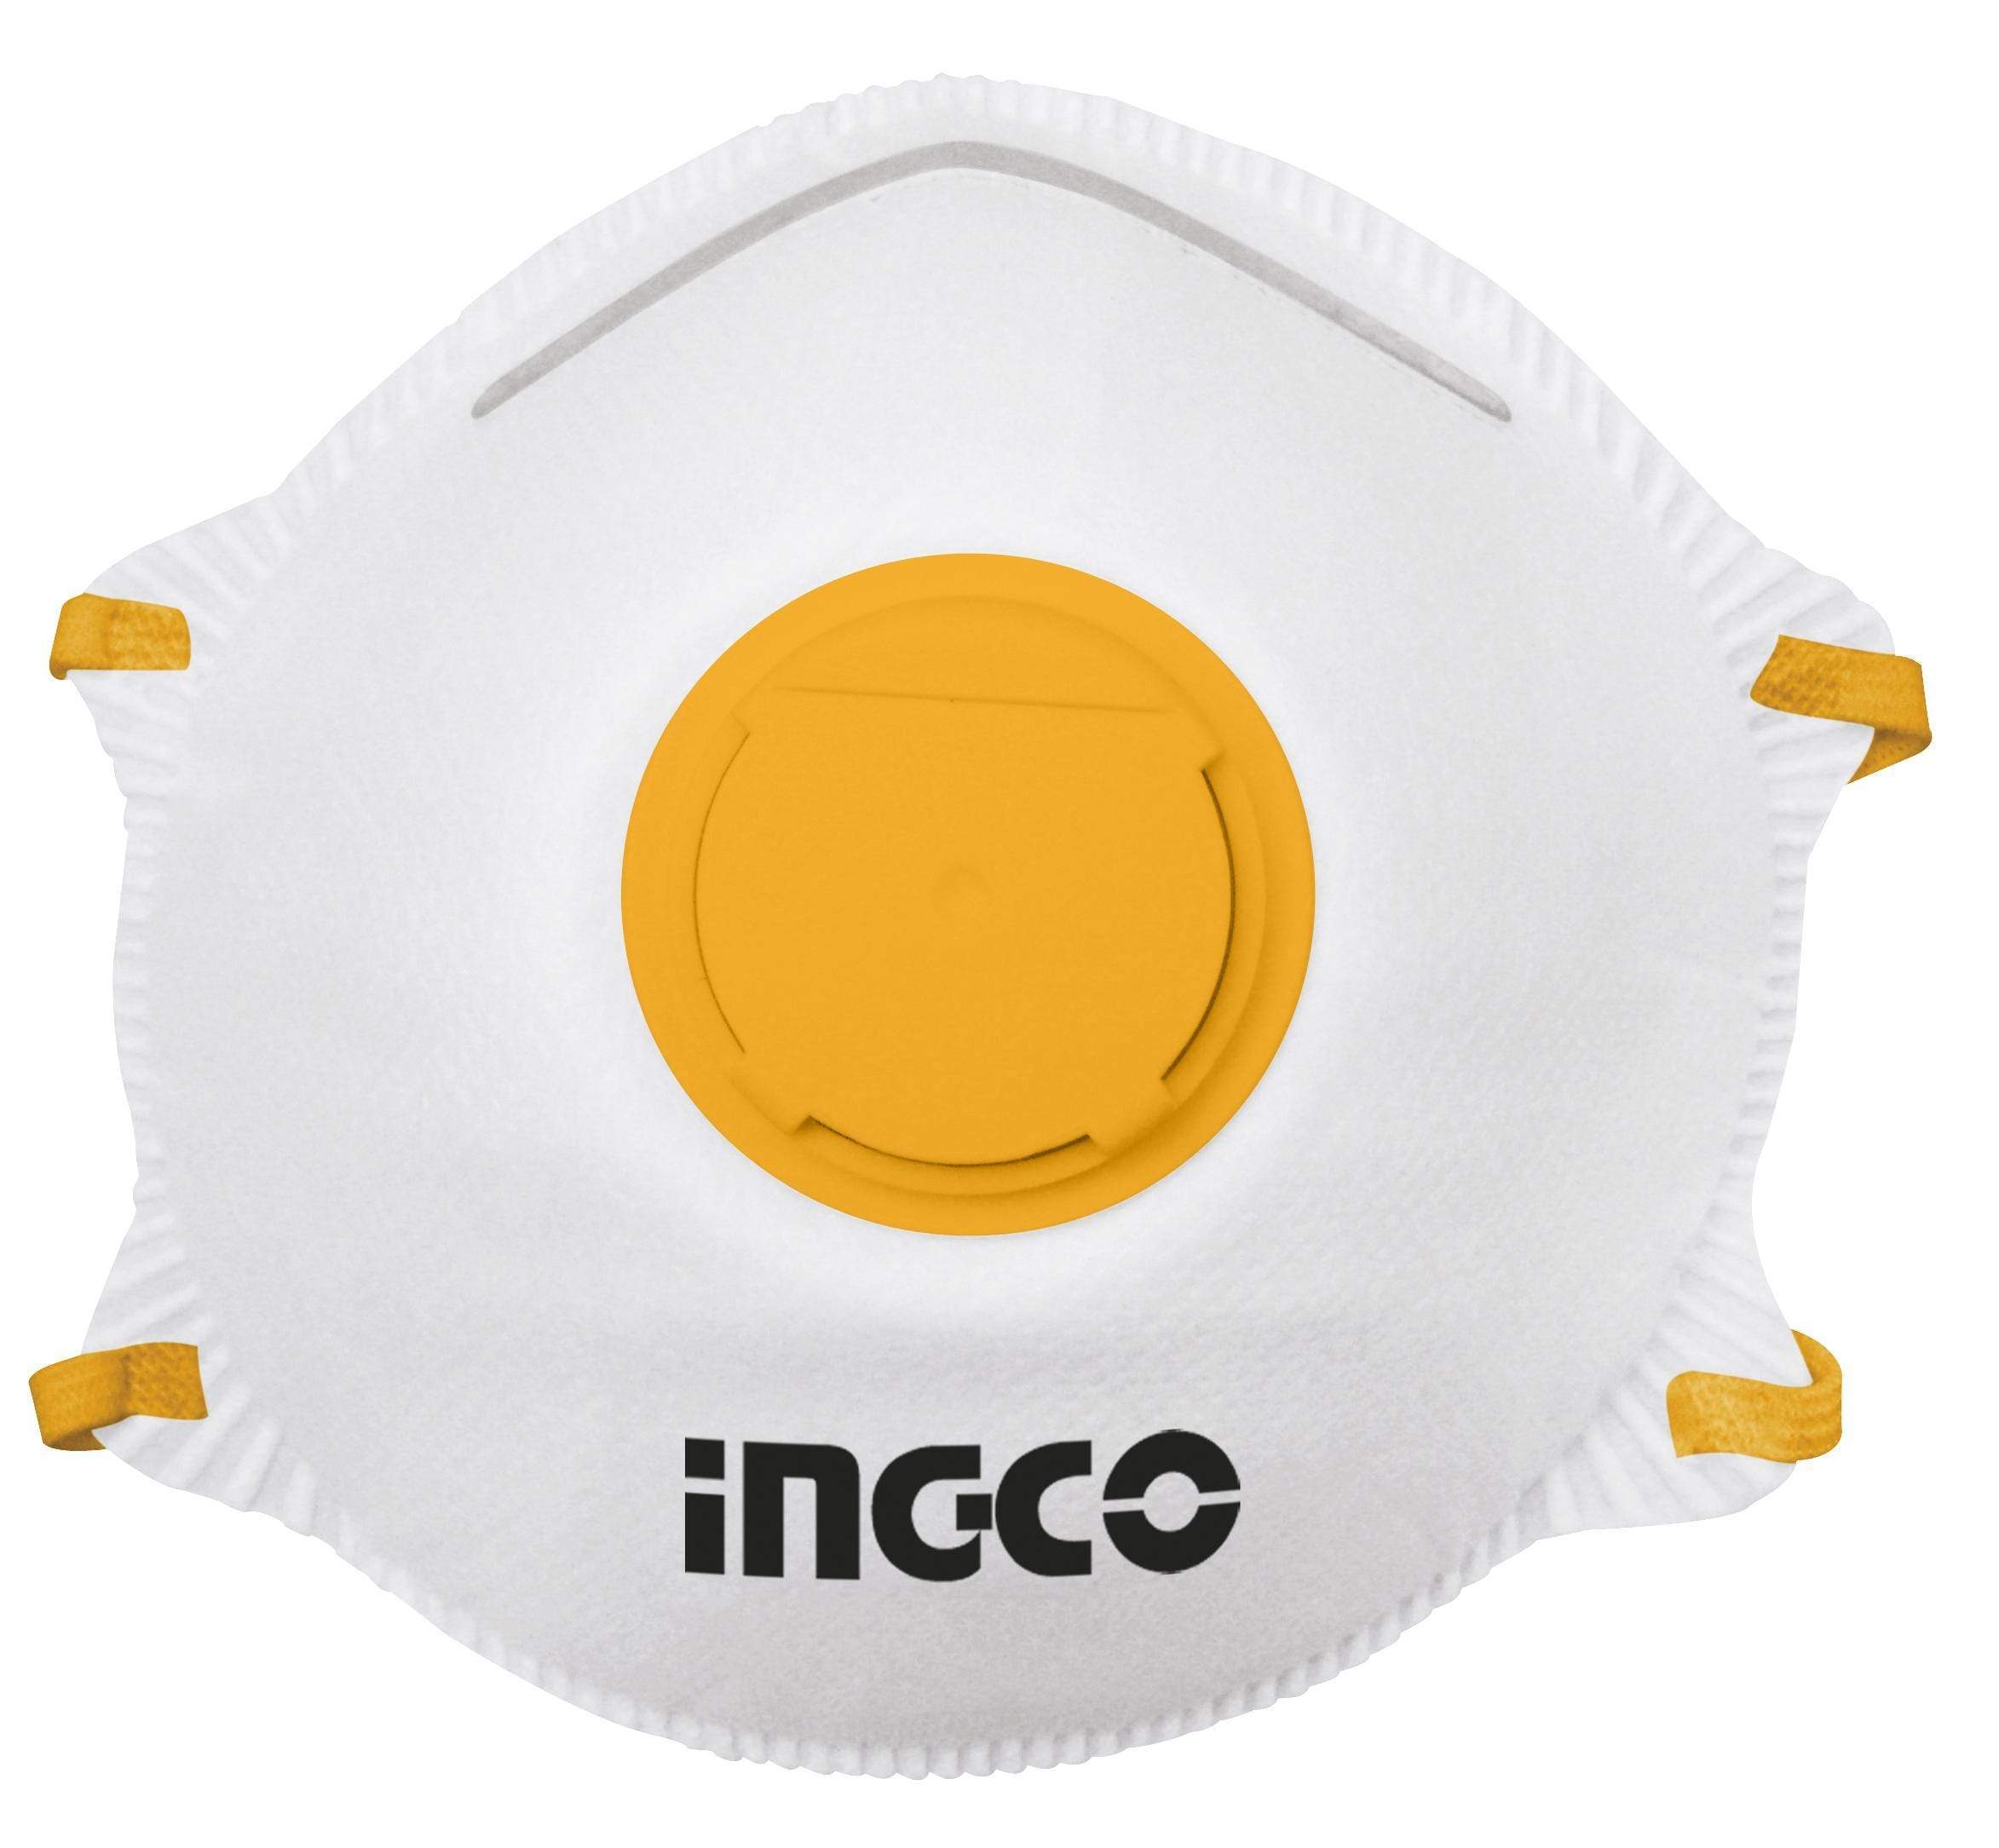 Ingco Dust Mask with Breath Valve - HDM02 | Supply Master | Accra, Ghana Tools Building Steel Engineering Hardware tool